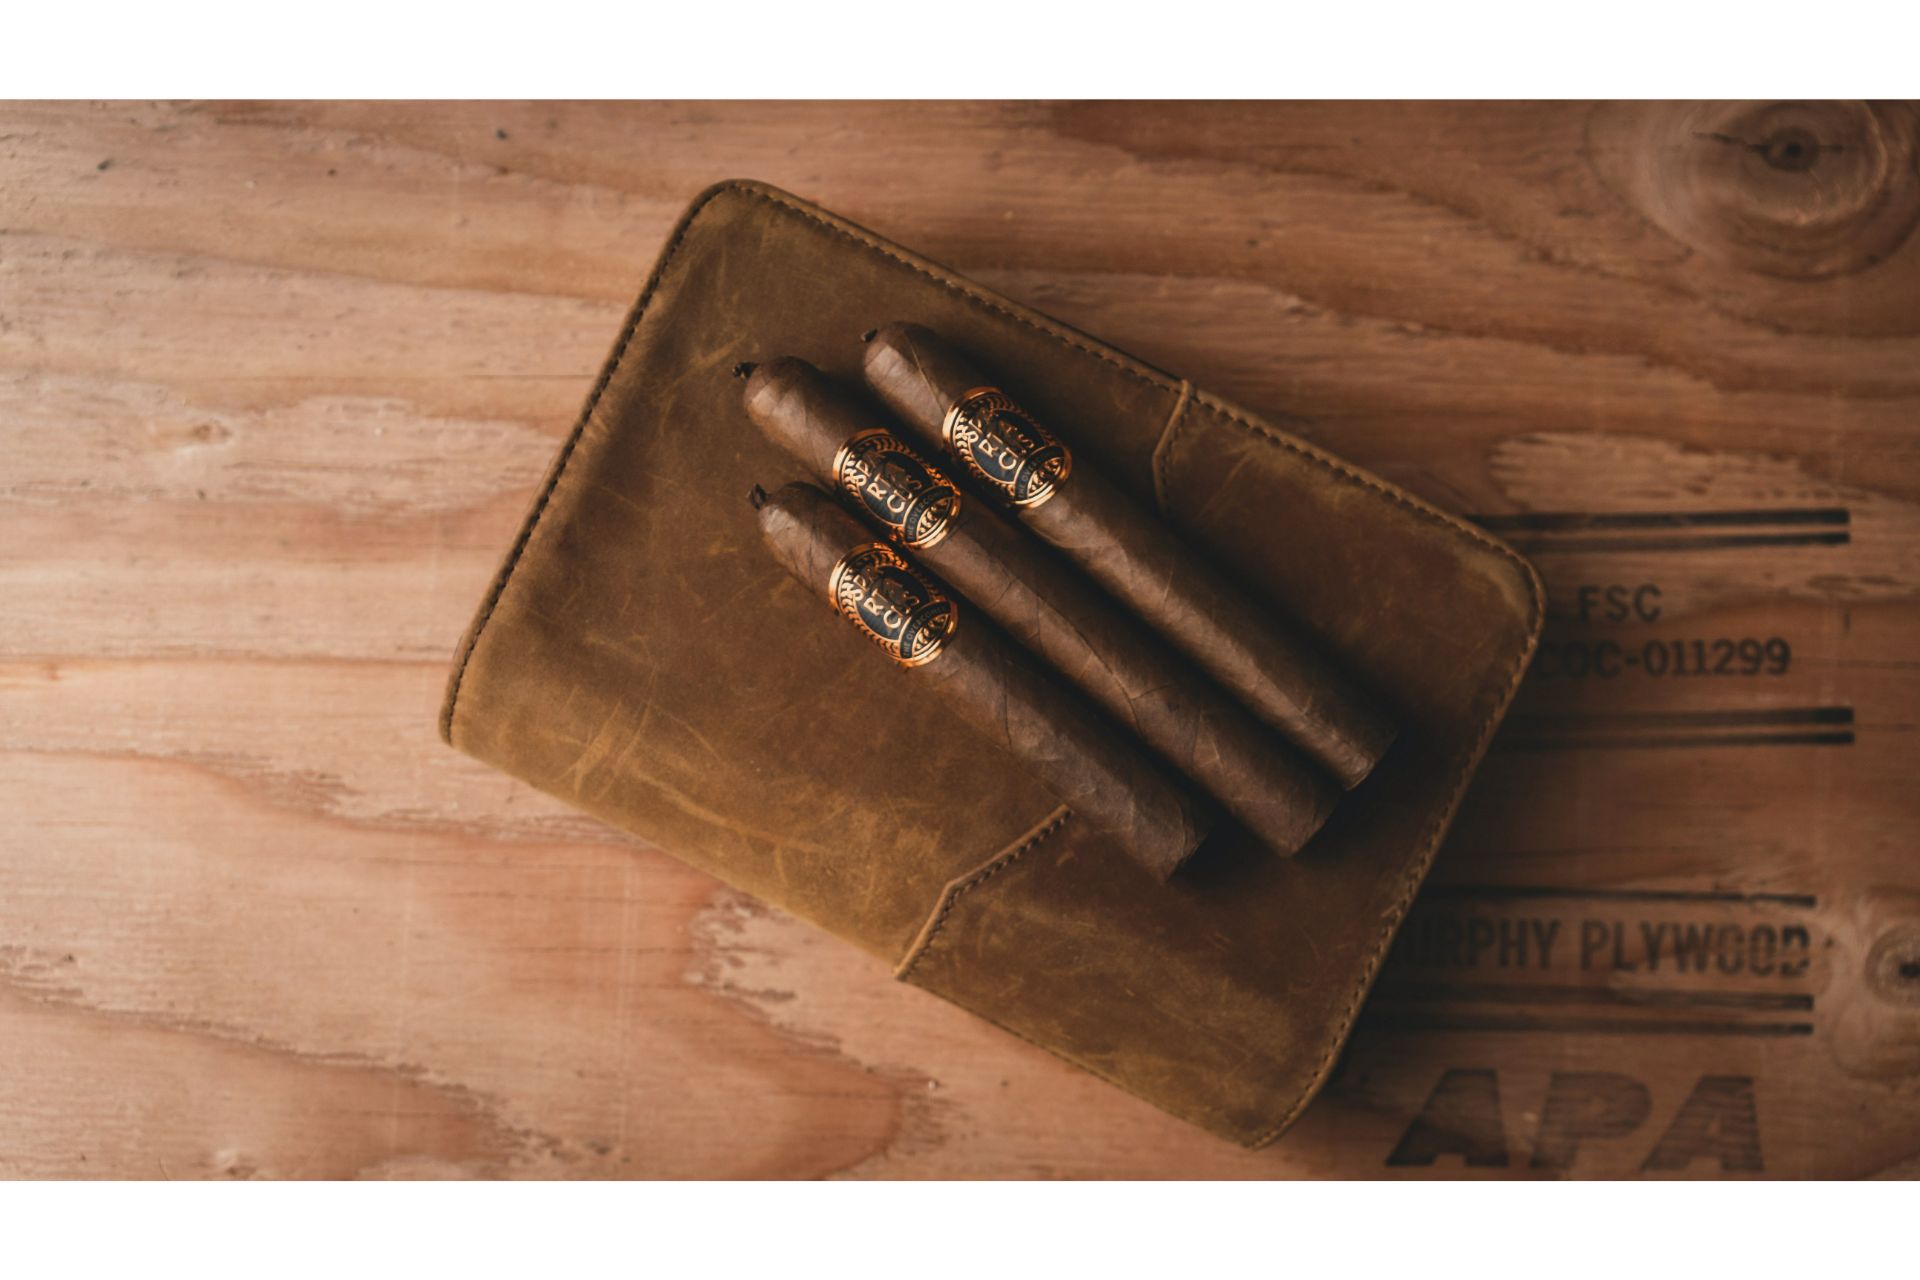 Cigars on cigar pouch.